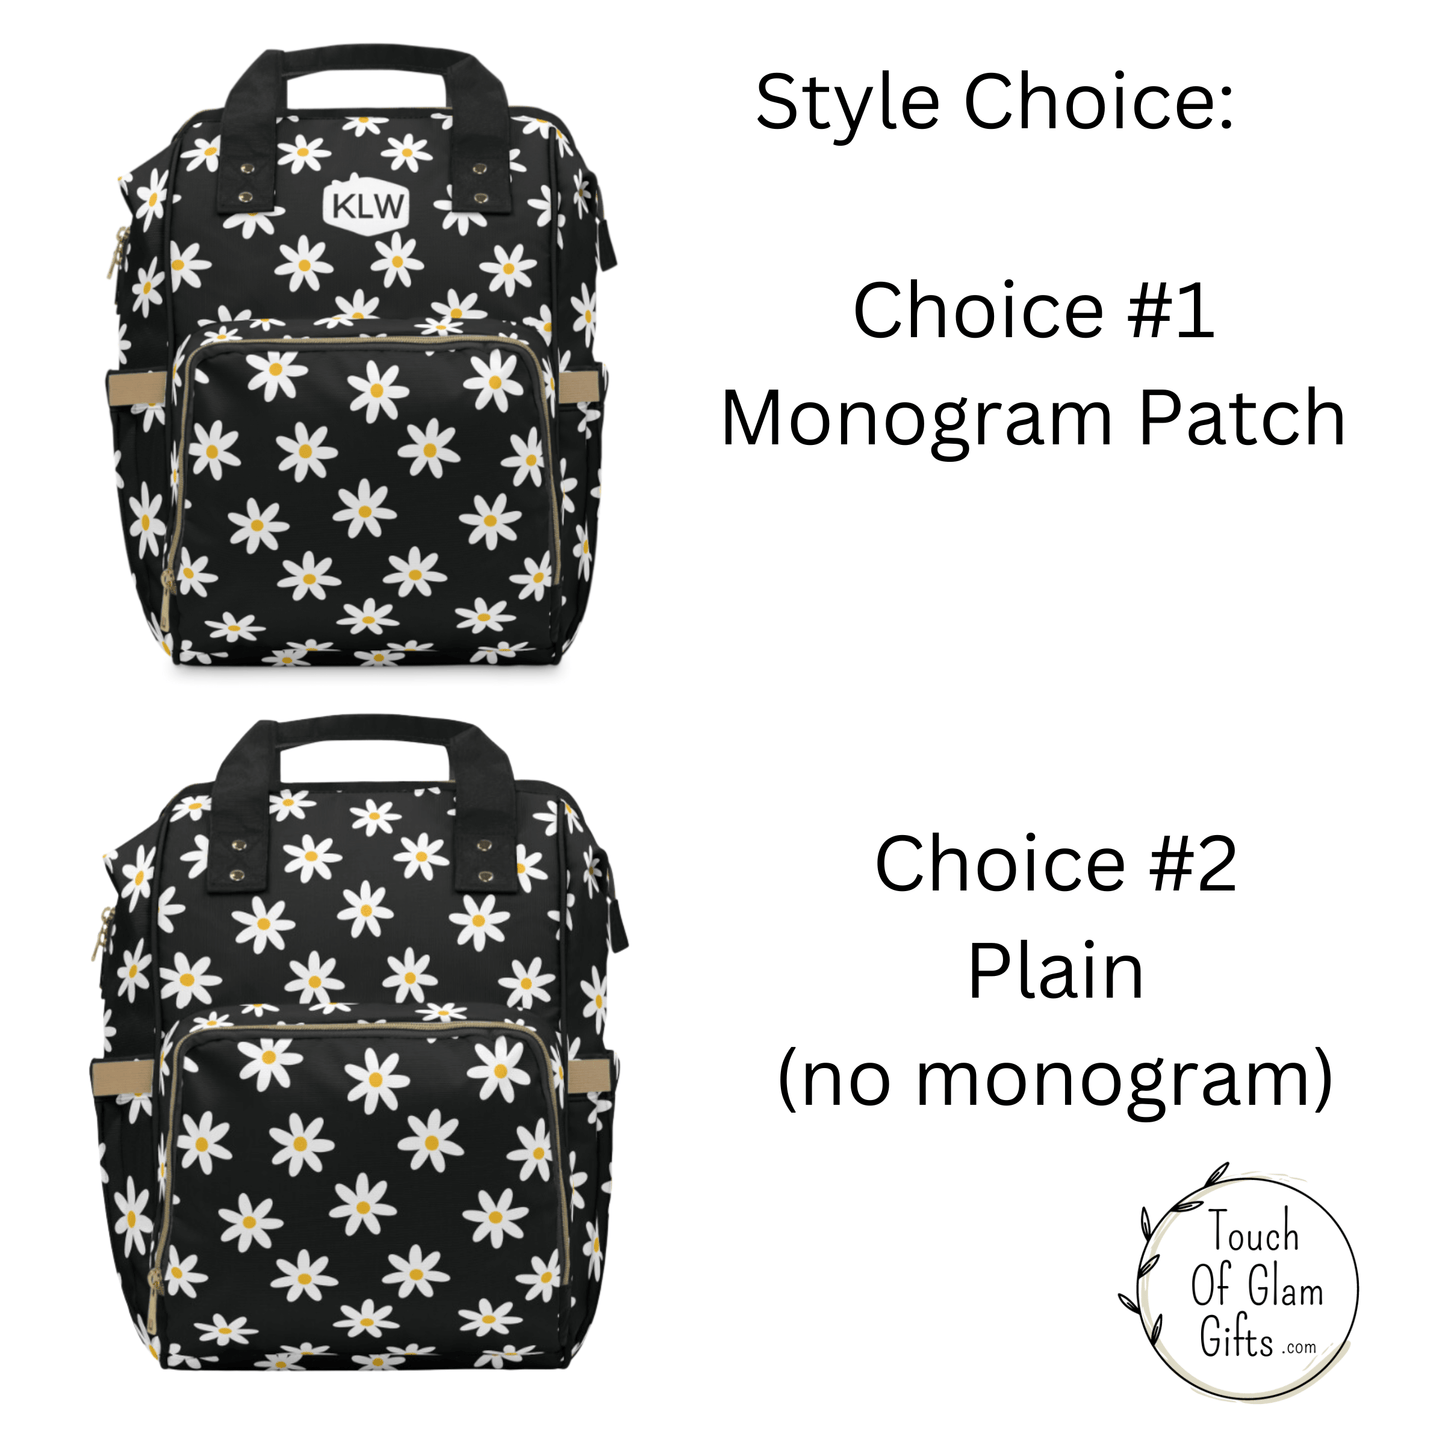 Flower Diaper Bag Backpack Purse for New Mom, Cute Personalized Baby Shower Gift, Black White Monogrammed Birthday and Mother's Day Gift